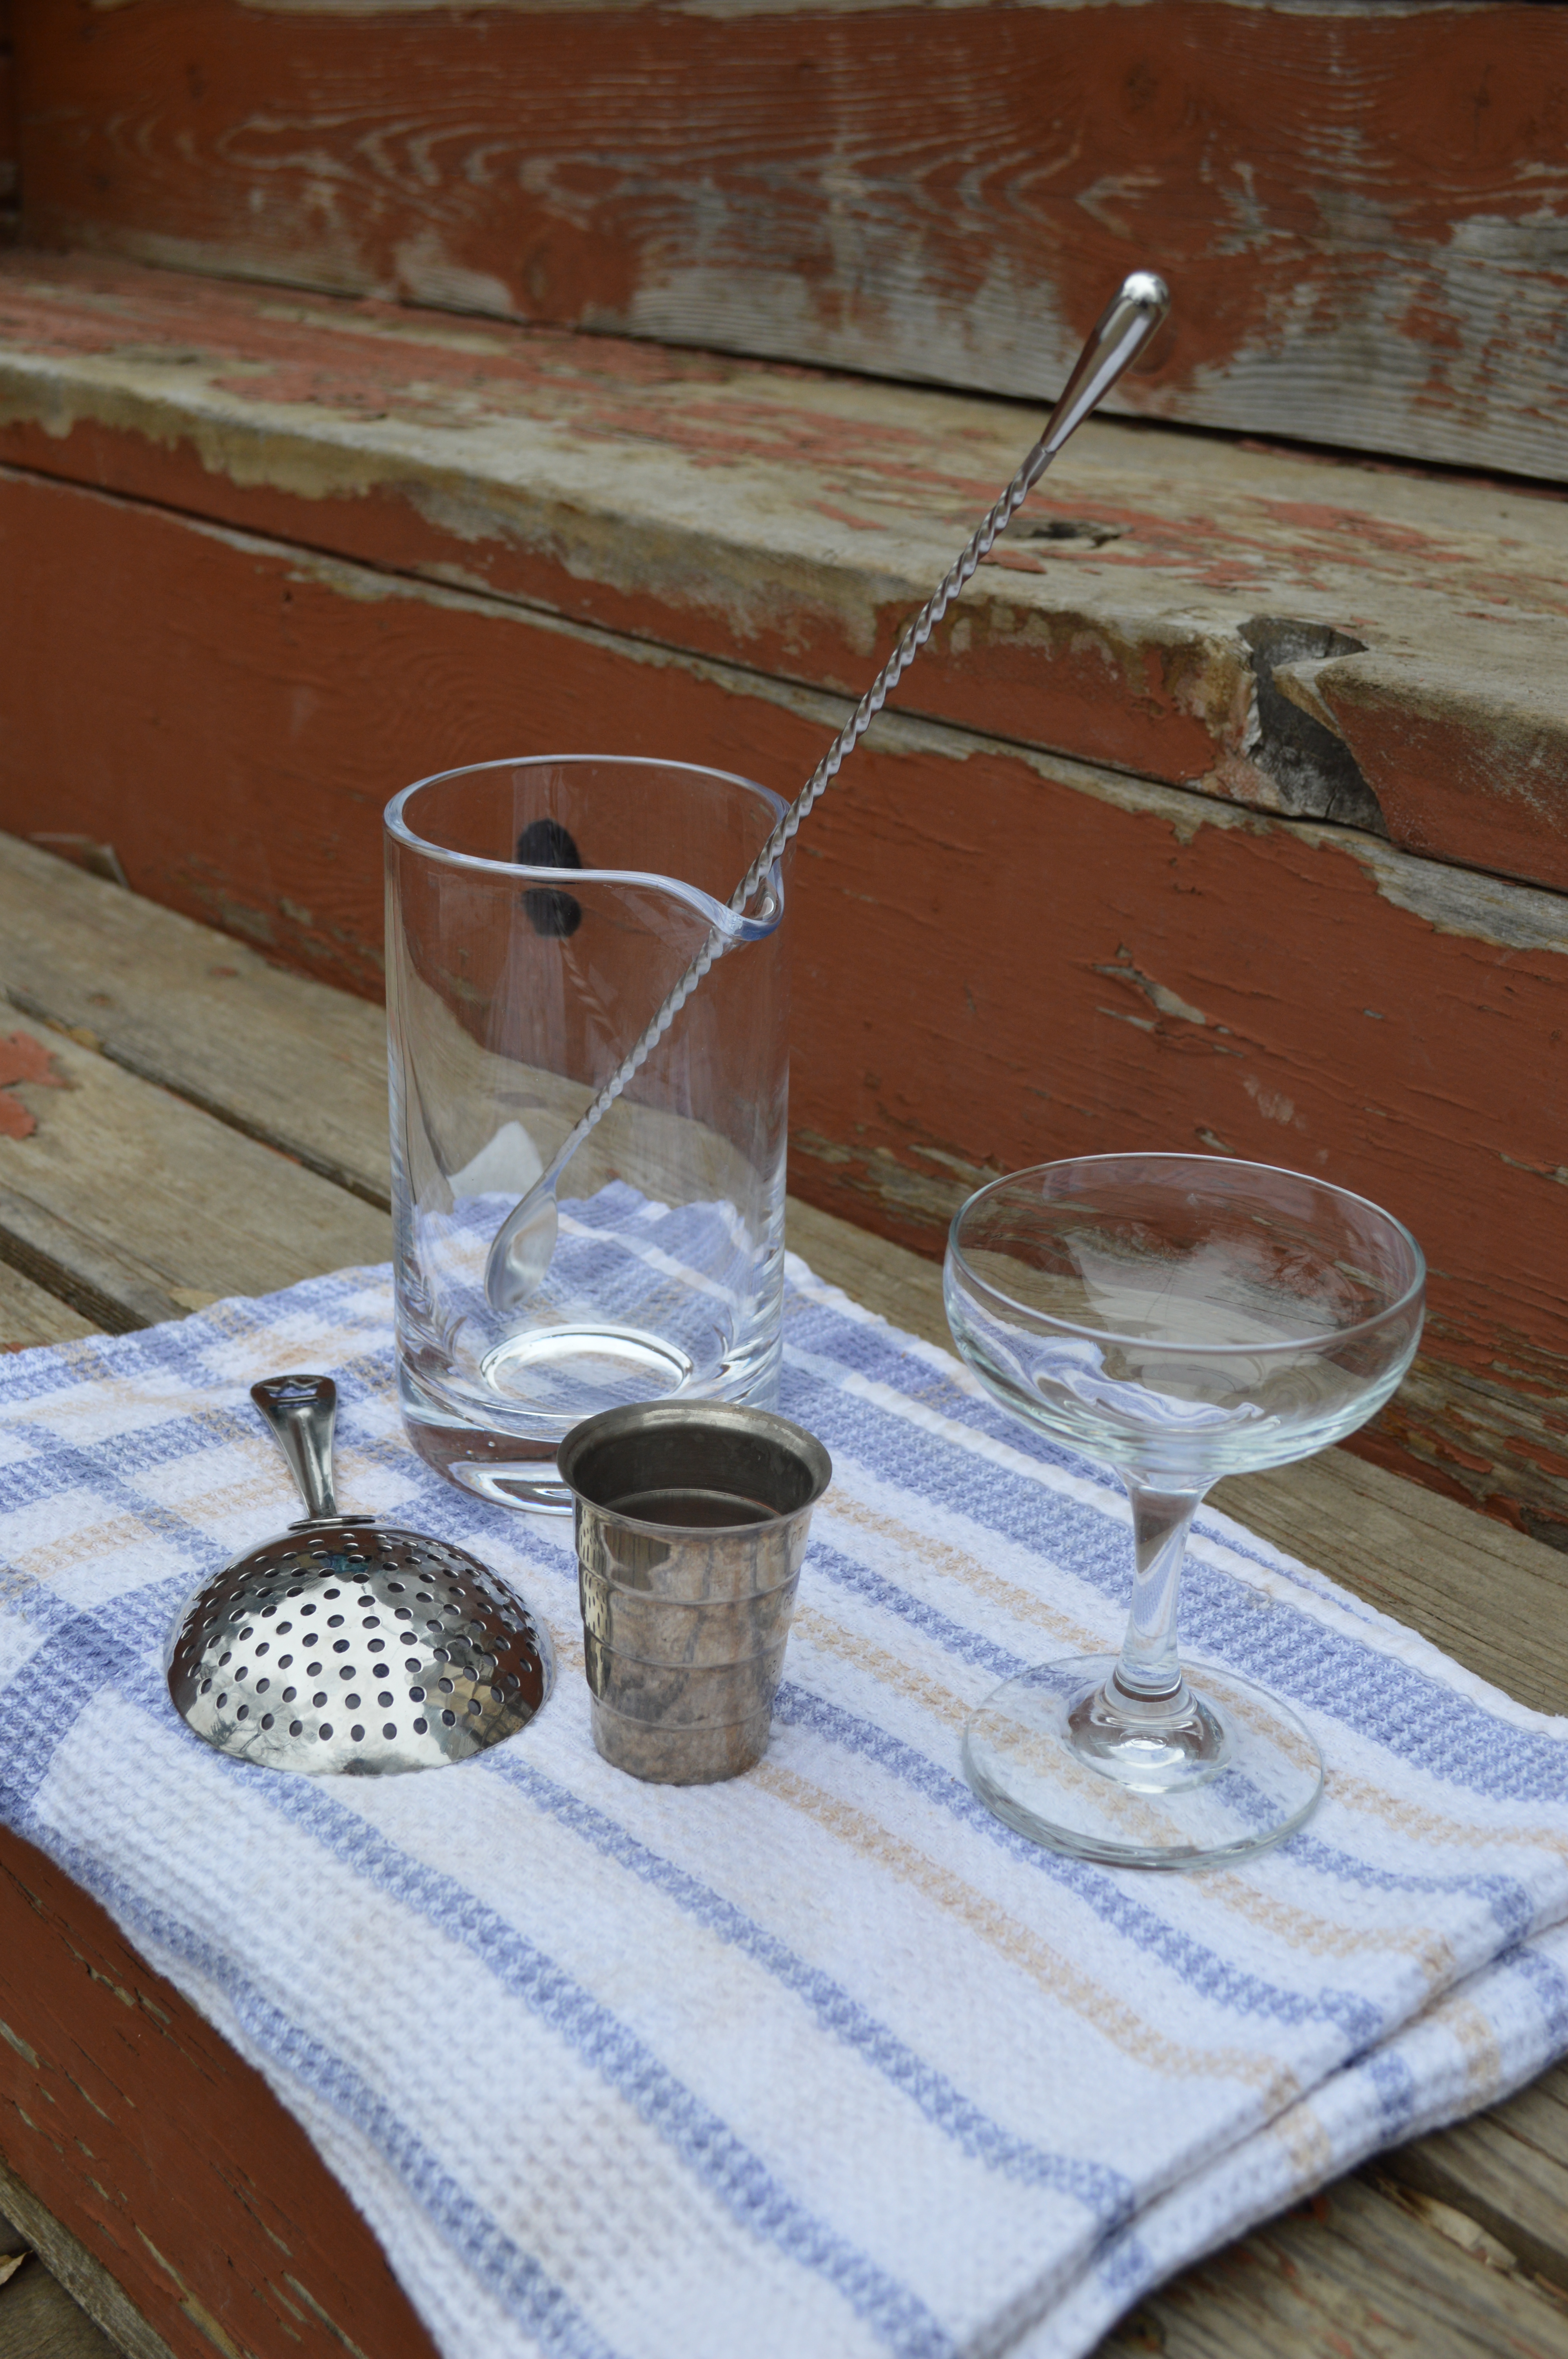 The equipment required for a stirred cocktail: mixing glass, barspoon, and julep strainer.